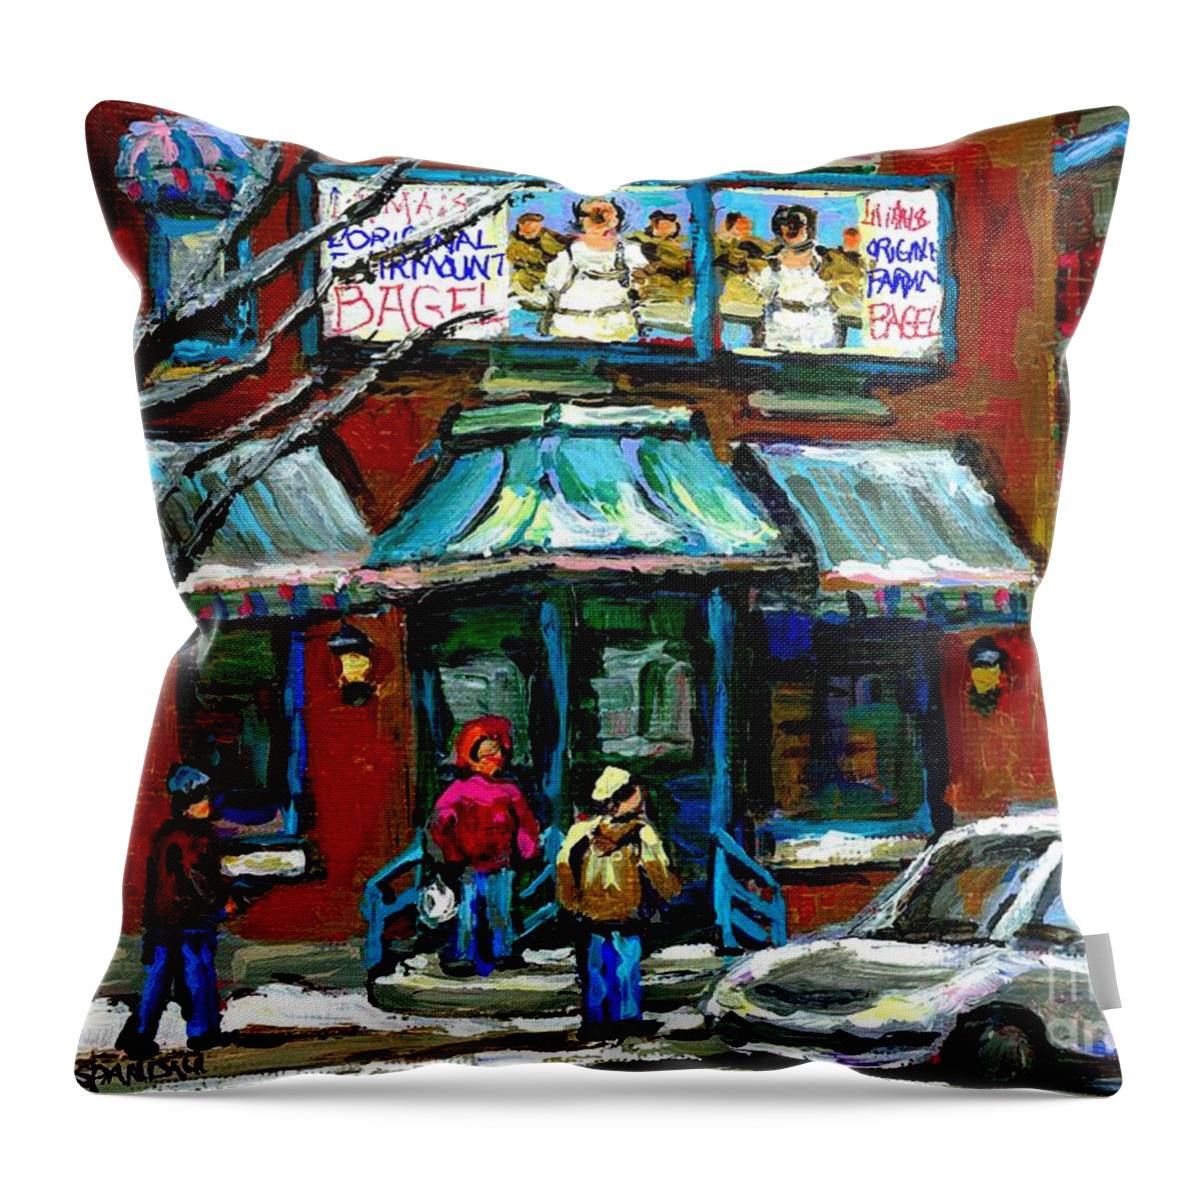 Montreal Throw Pillow featuring the painting Canadian Urban Winter City Scenes Paintings Fairmount Bagel Shop Montreal Art Carole Spandau by Carole Spandau